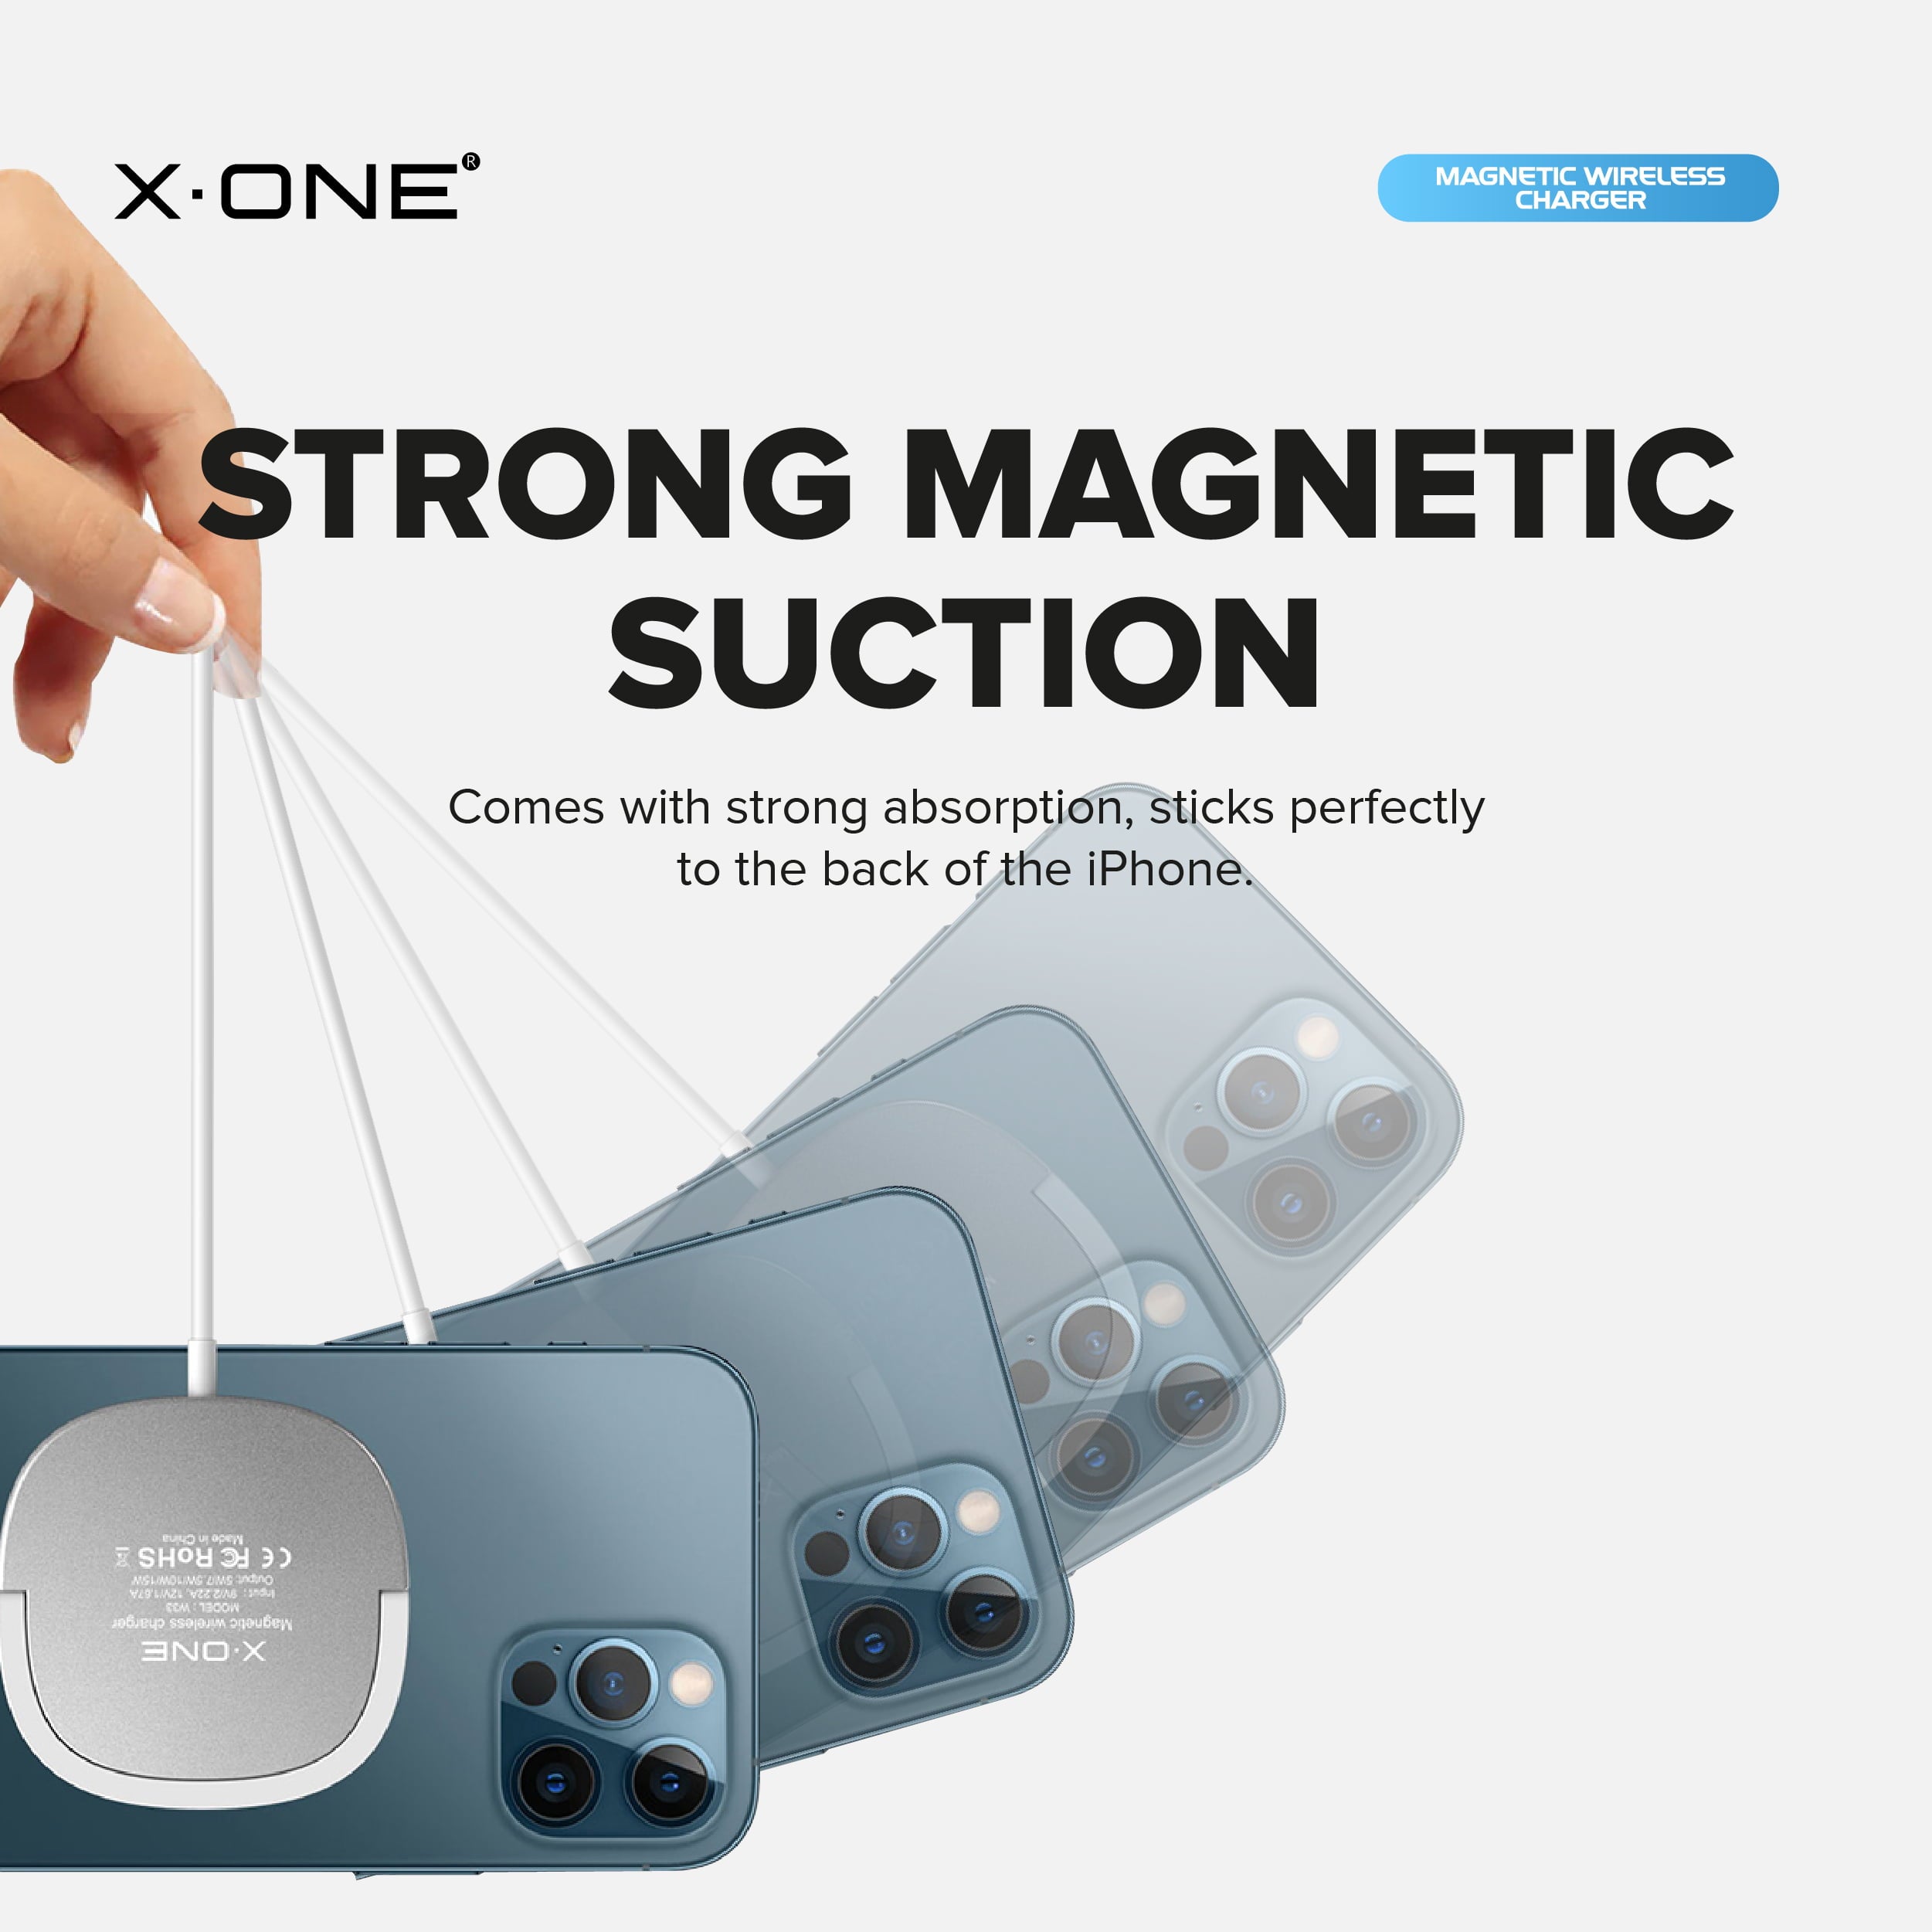 X.One® 15W Magnetic Wireless Charger